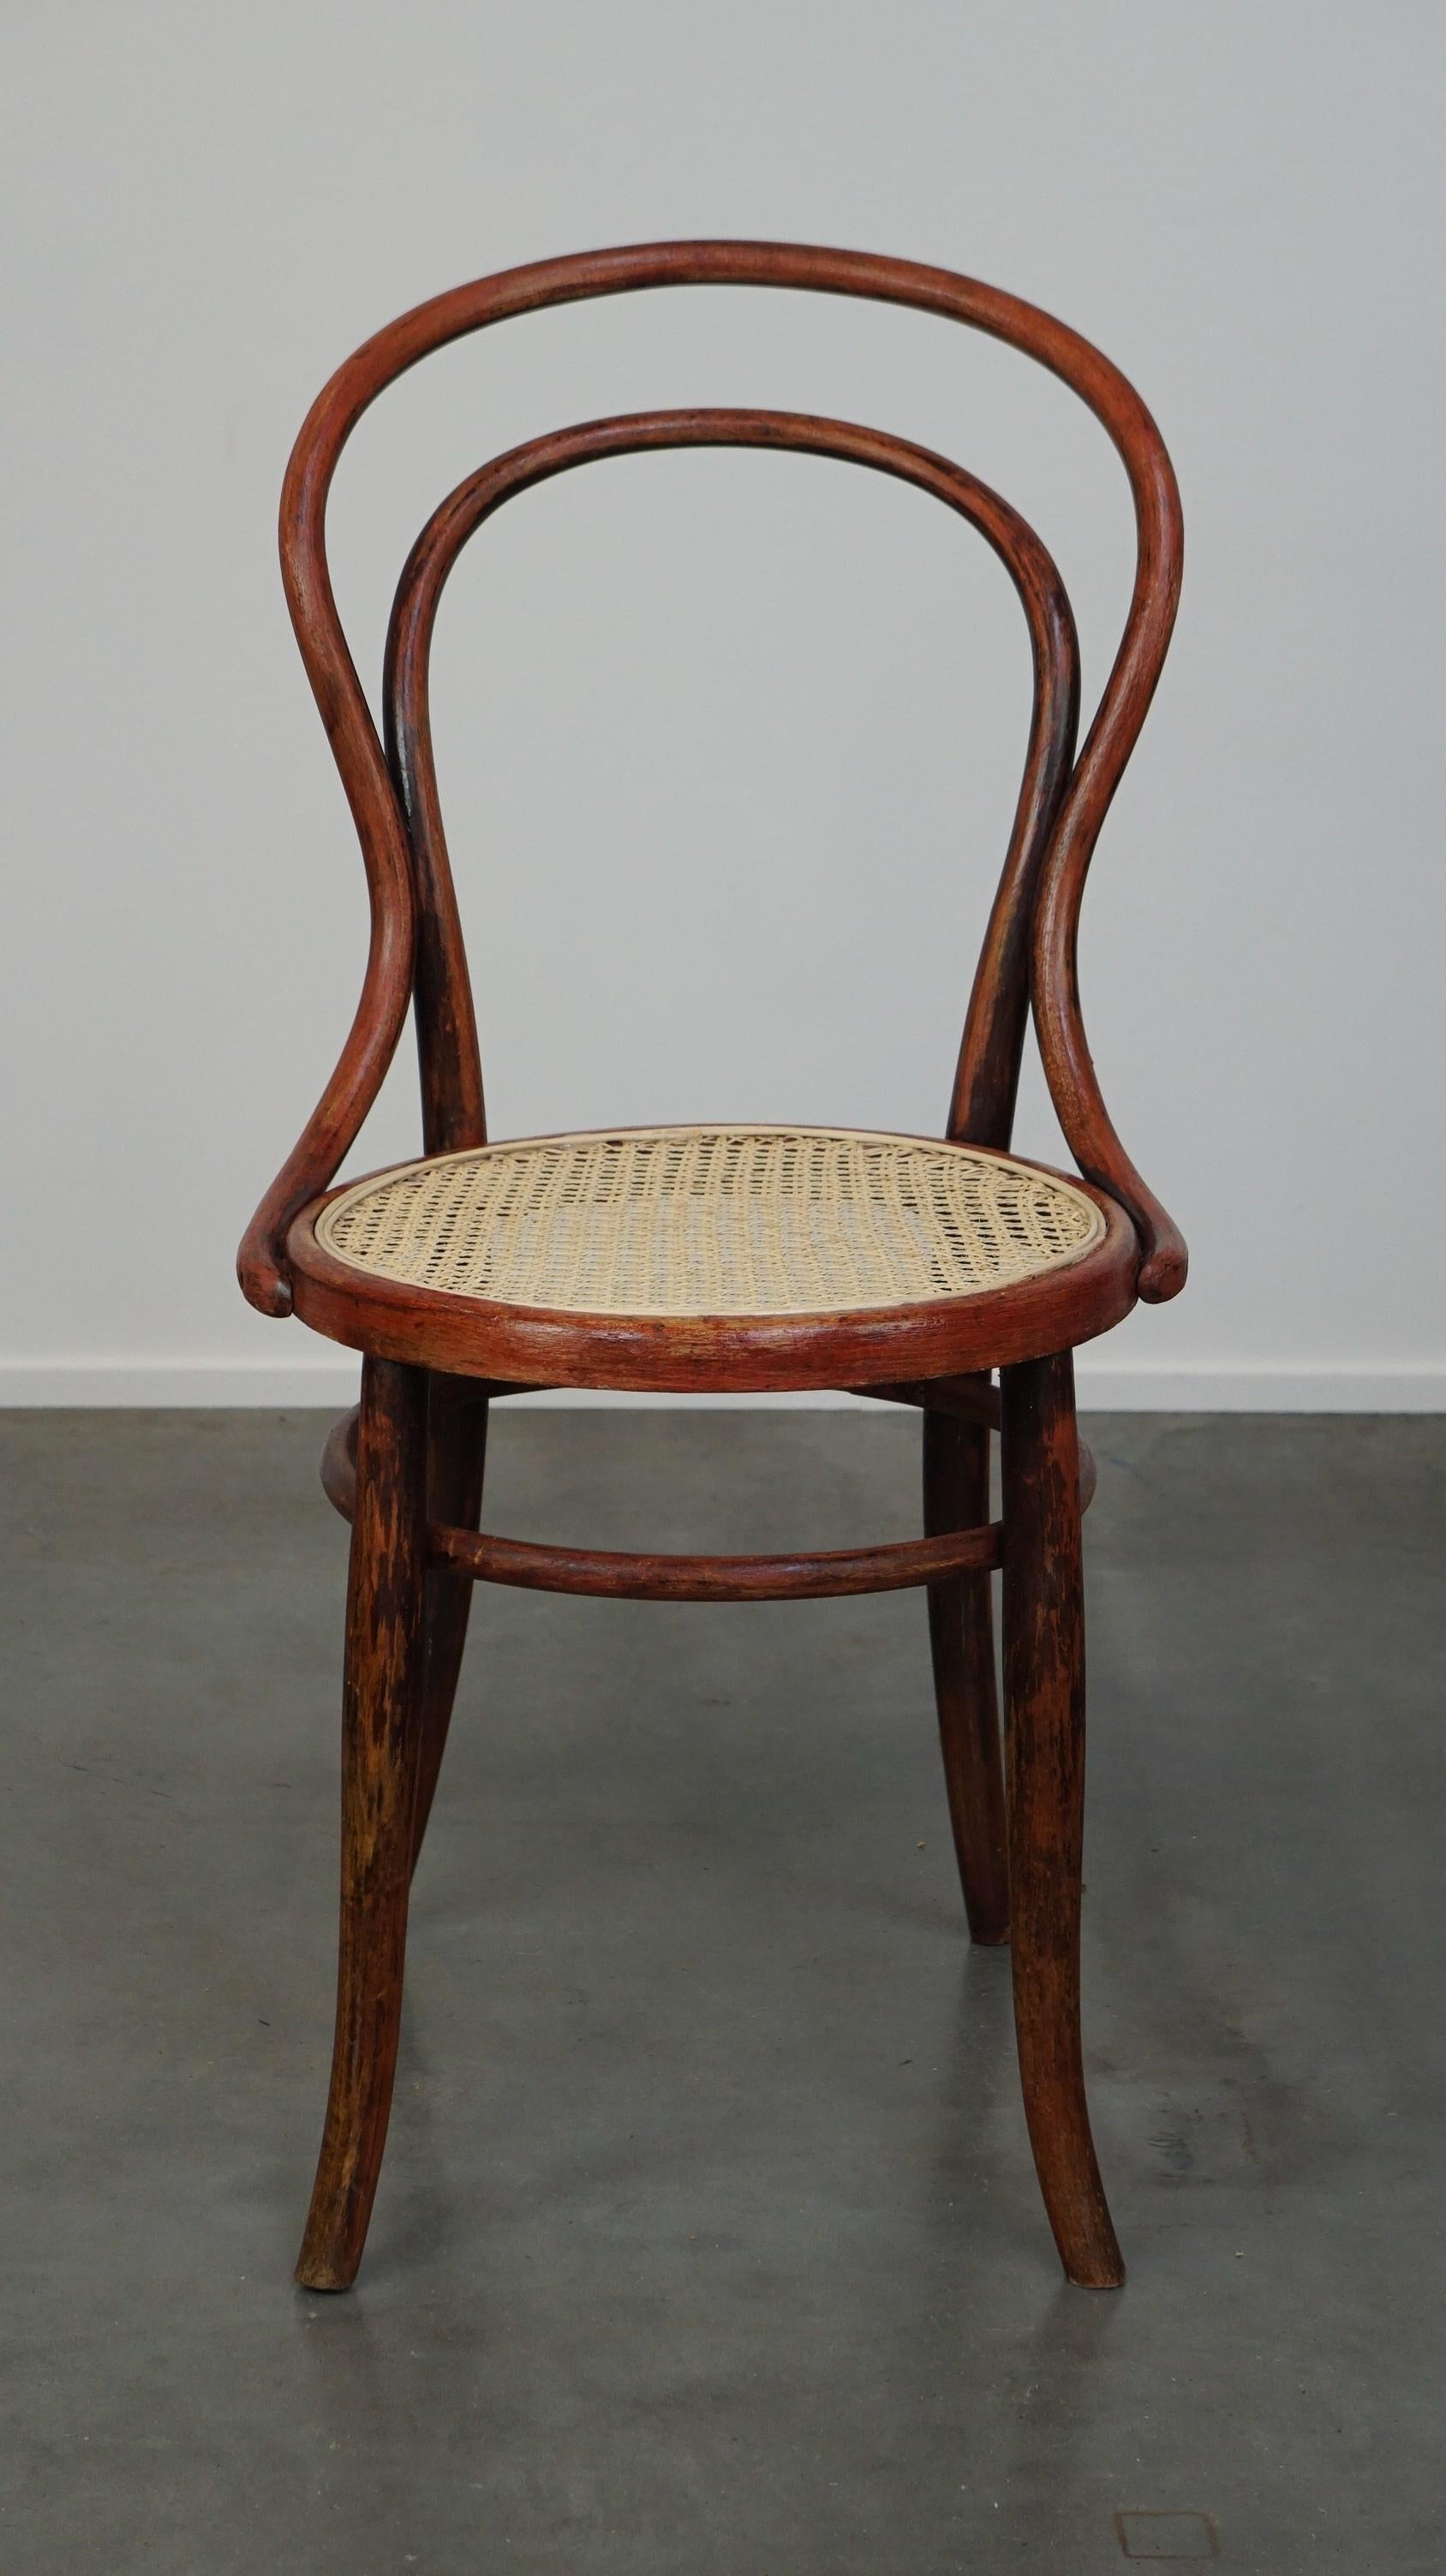 Chair no. 14, also known as a bistro chair, designed by Thonet, produced by Fischel, was one of Thonet's most popular chairs alongside chair no. 18. It features a half arch in the backrest and was likely produced around 1900. This model is still